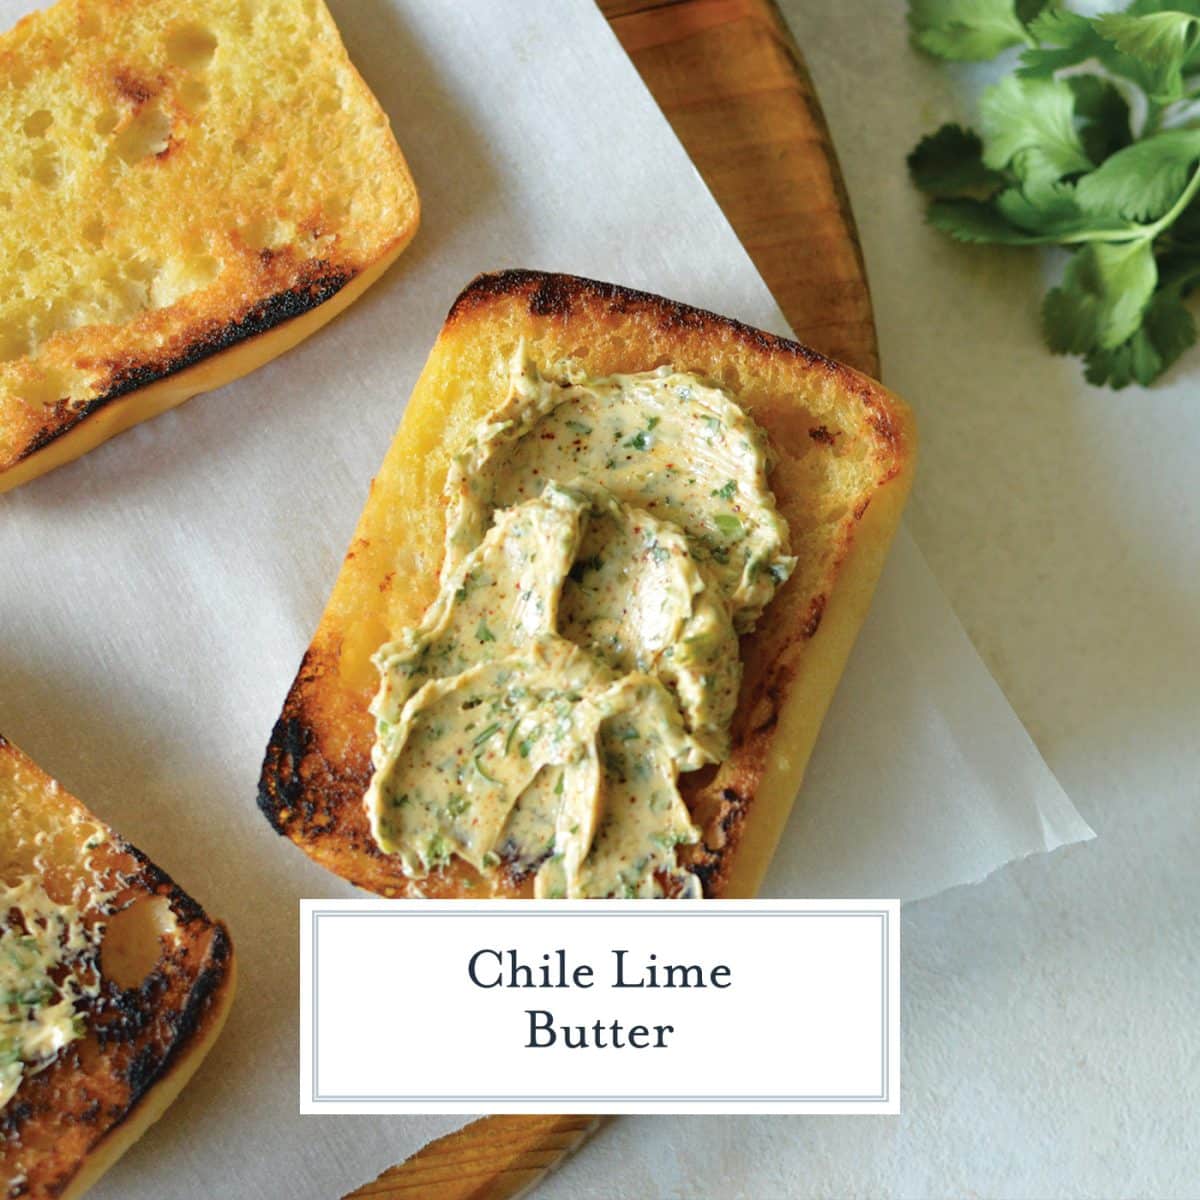 chili lime butter spread onto bread with text overlay for facebook